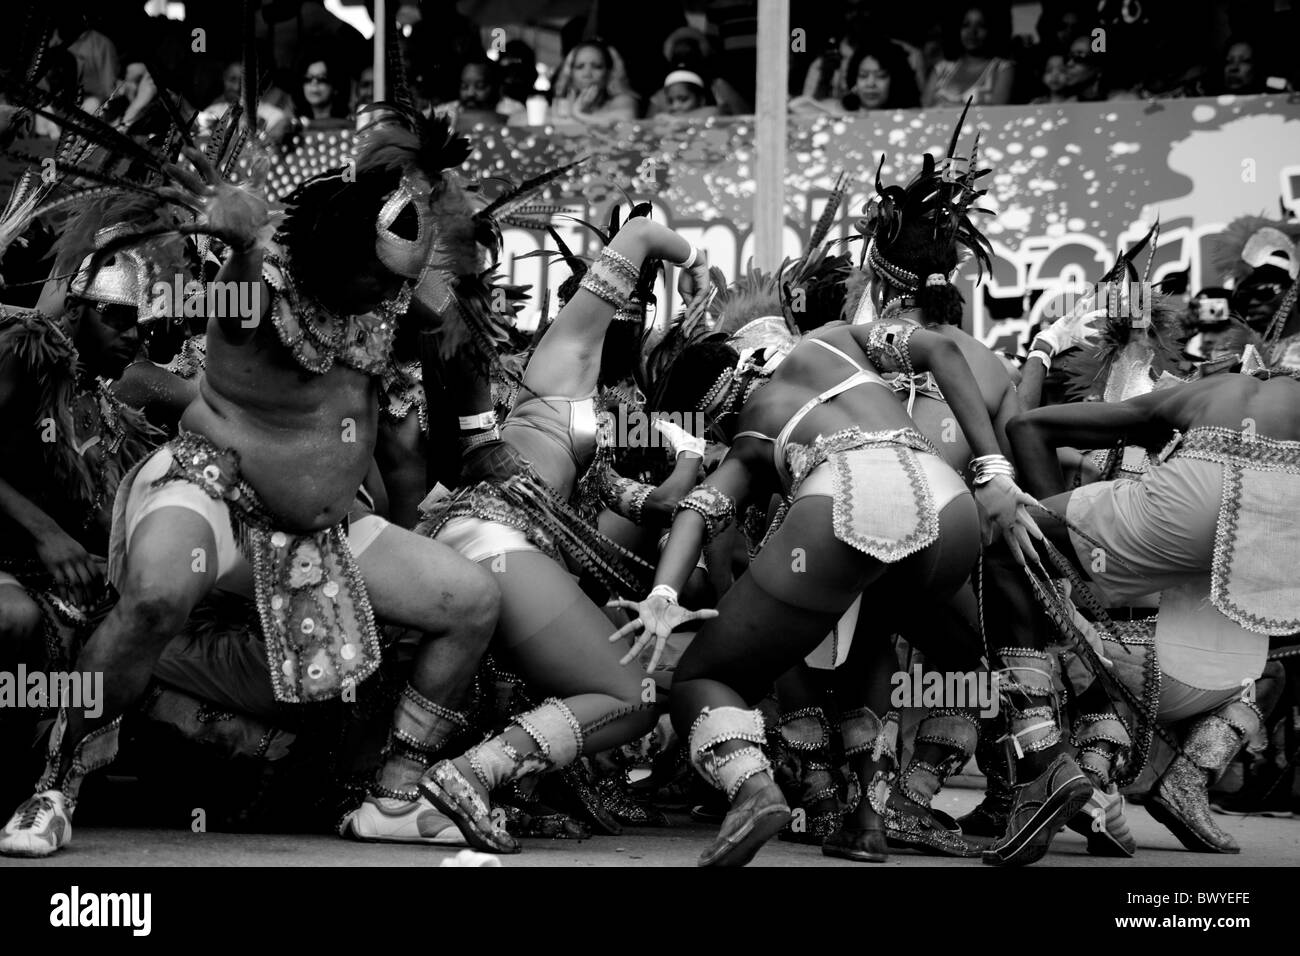 Trinidad carnival bodies writhing performing in front of Judges, black and white Stock Photo